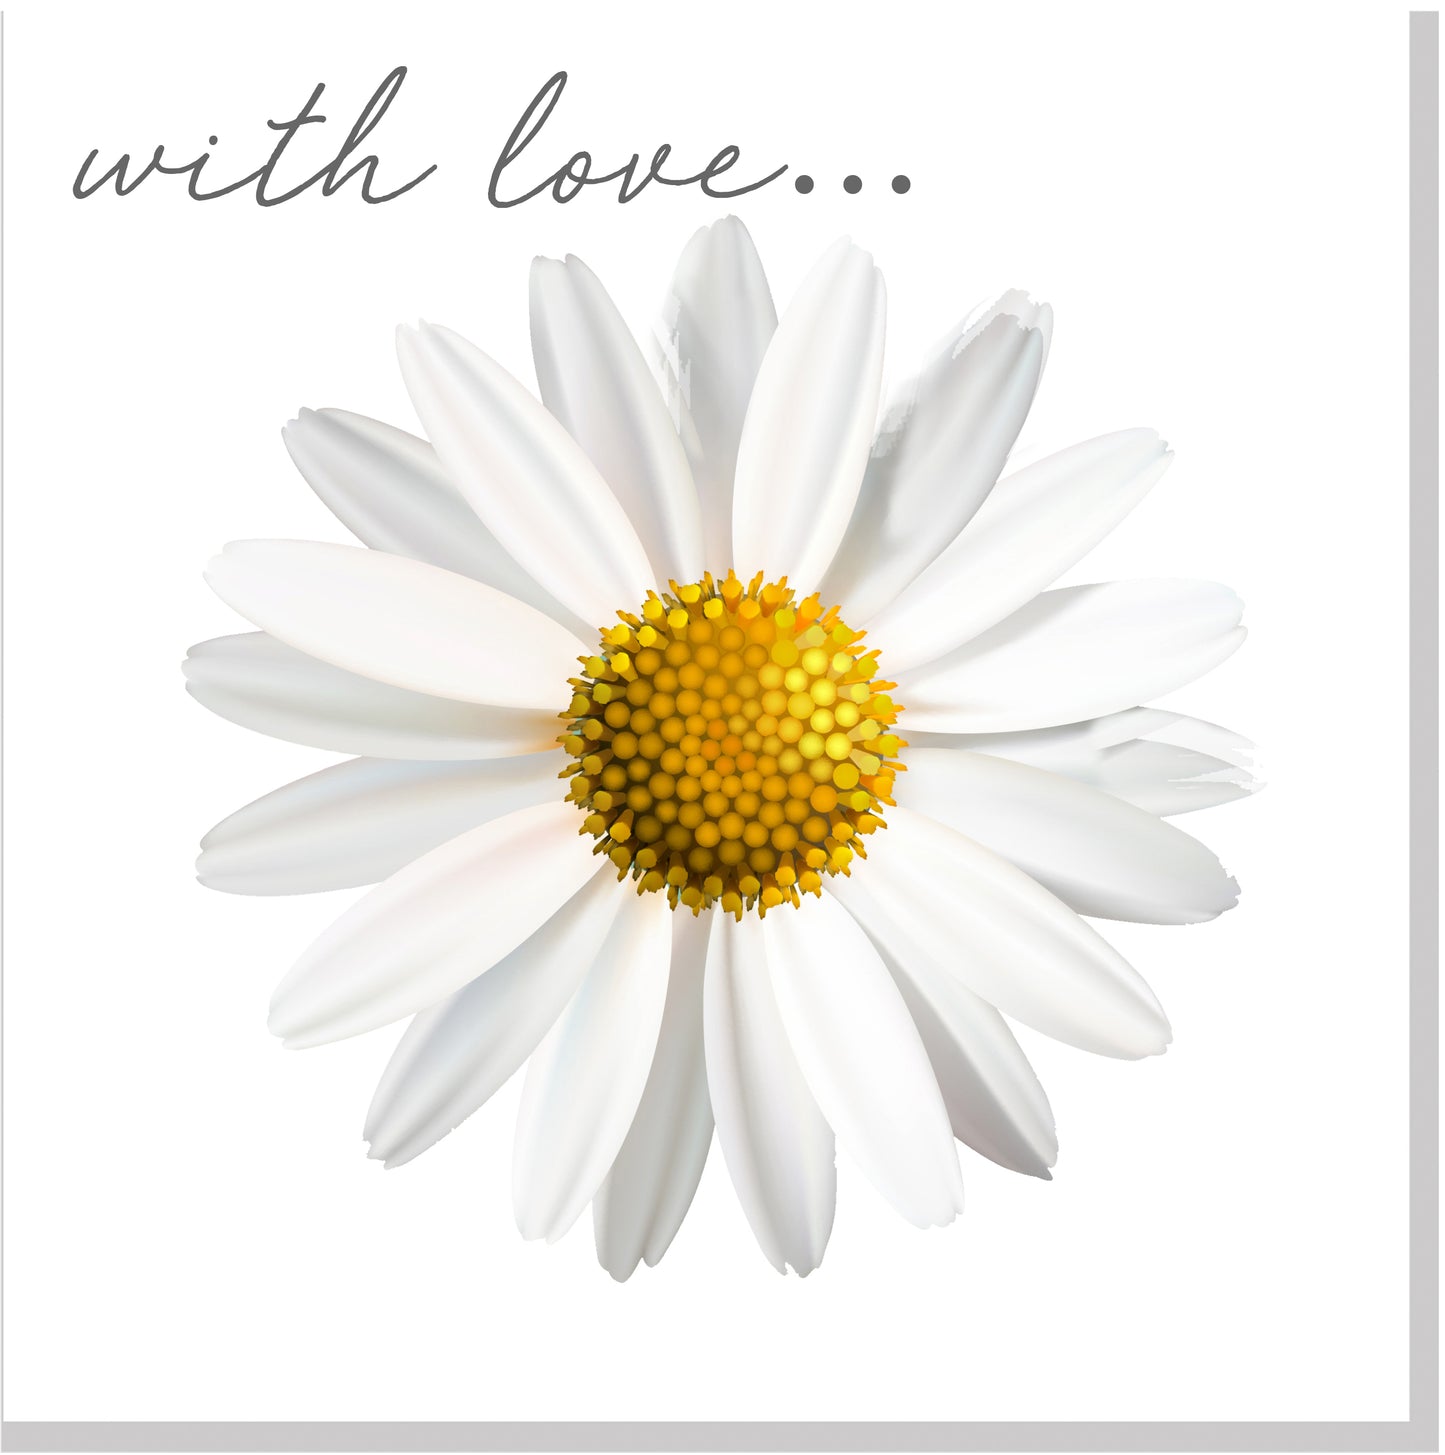 With love Daisy square card